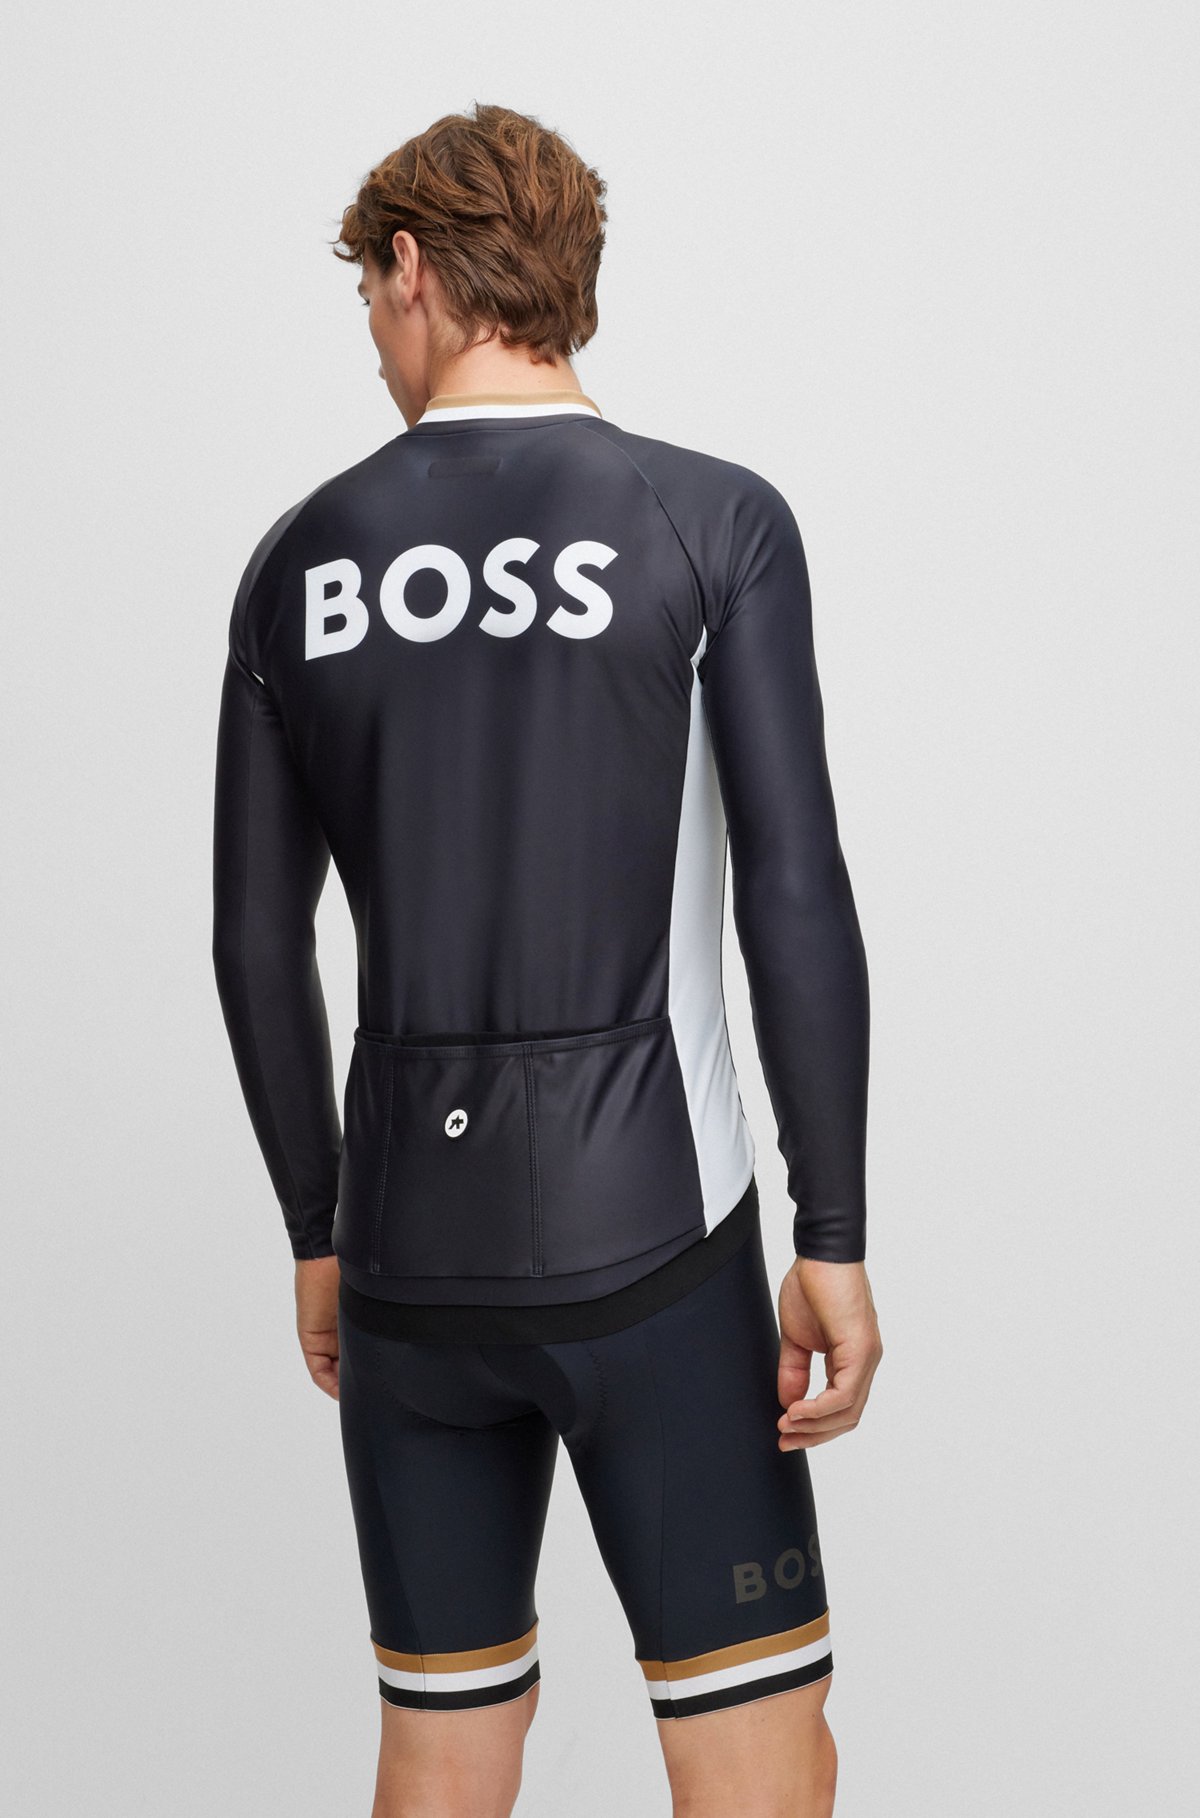  BOSS x ASSOS body-mapped jersey top with branding, Black